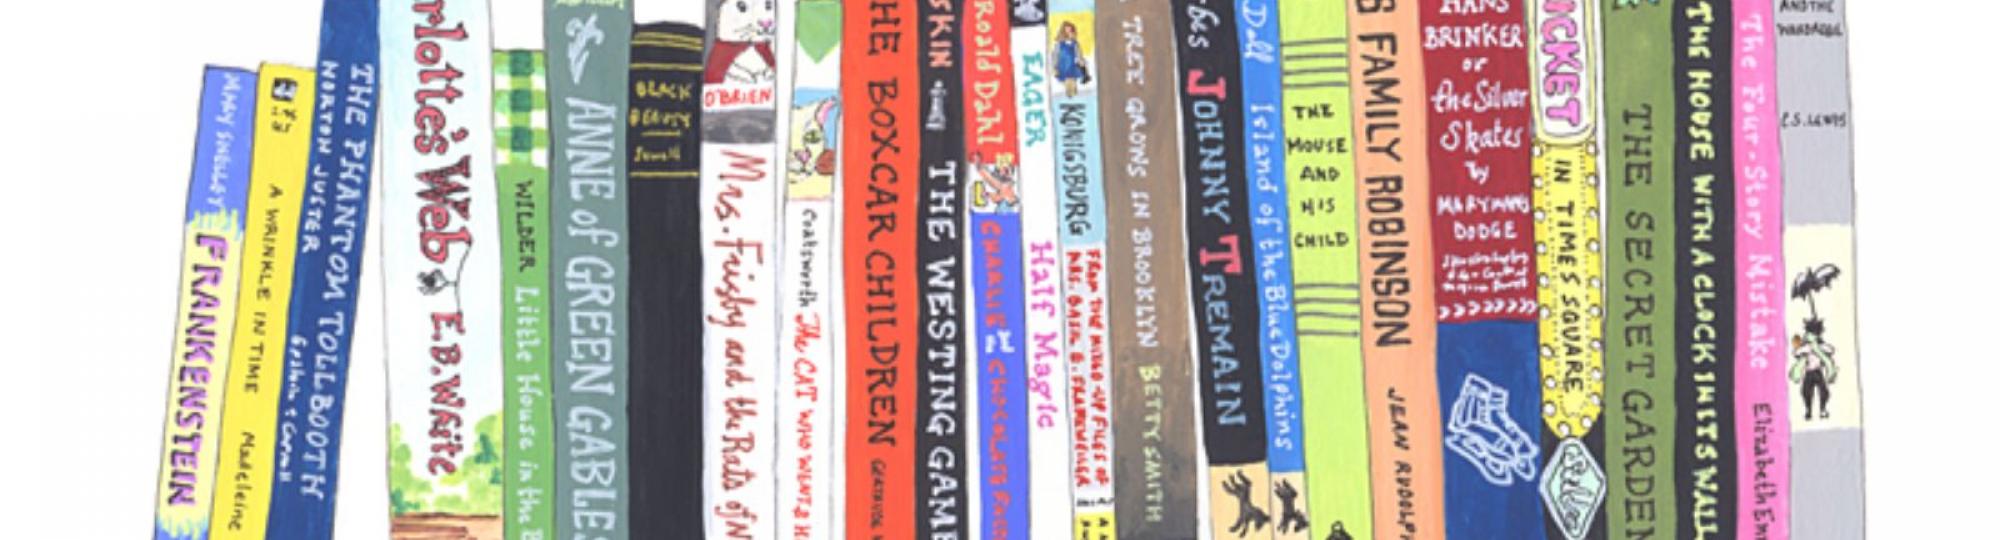 Drawing of childrens books on a book shelf